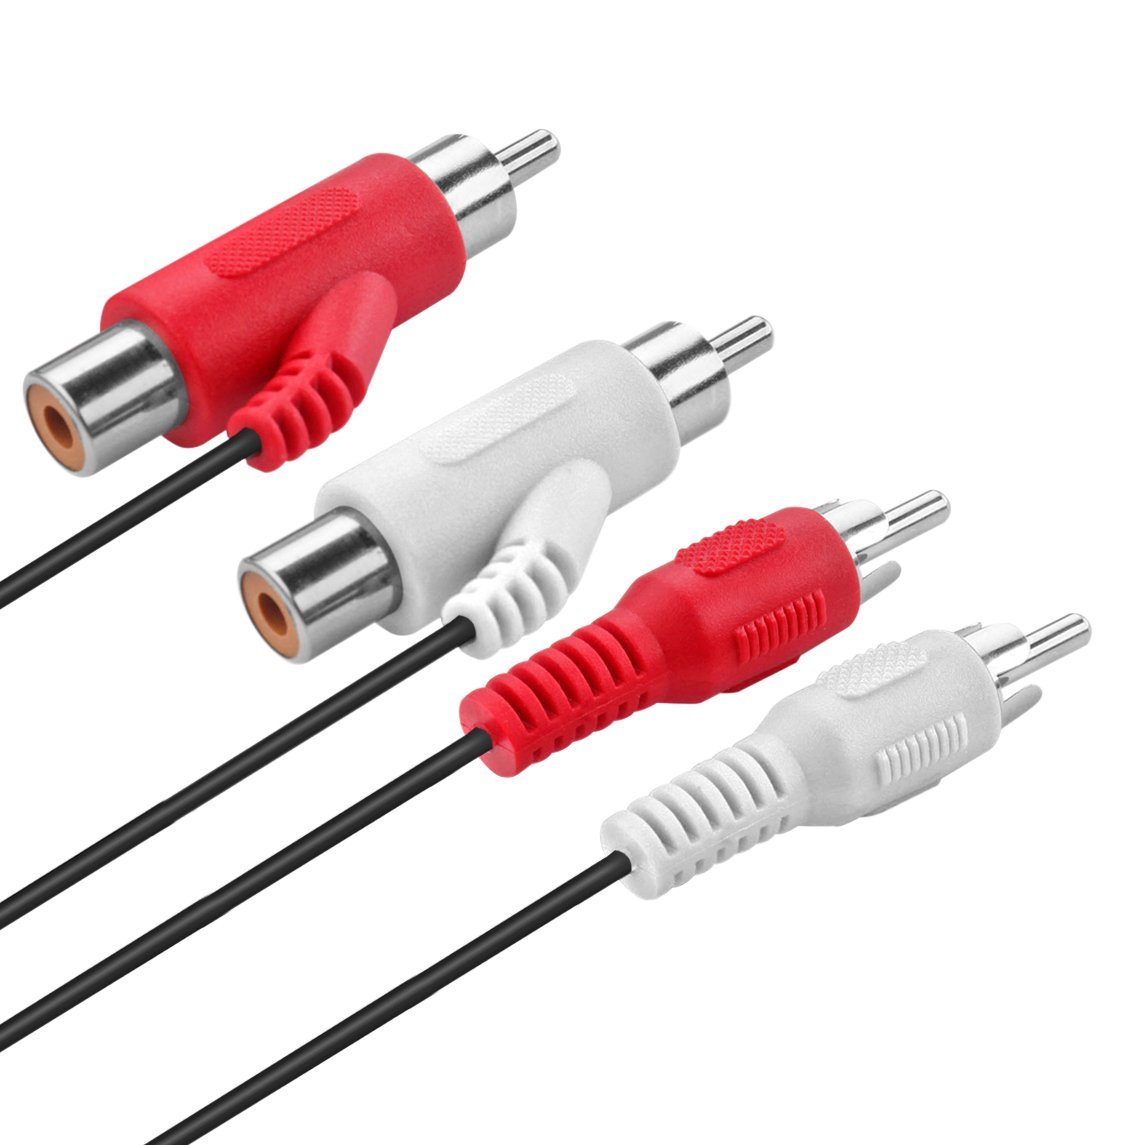 RCA Audio Piggyback Cable, 2 RCA Male to 2 RCA Male + RCA Female Piggyback (6ft) - image 2 of 3